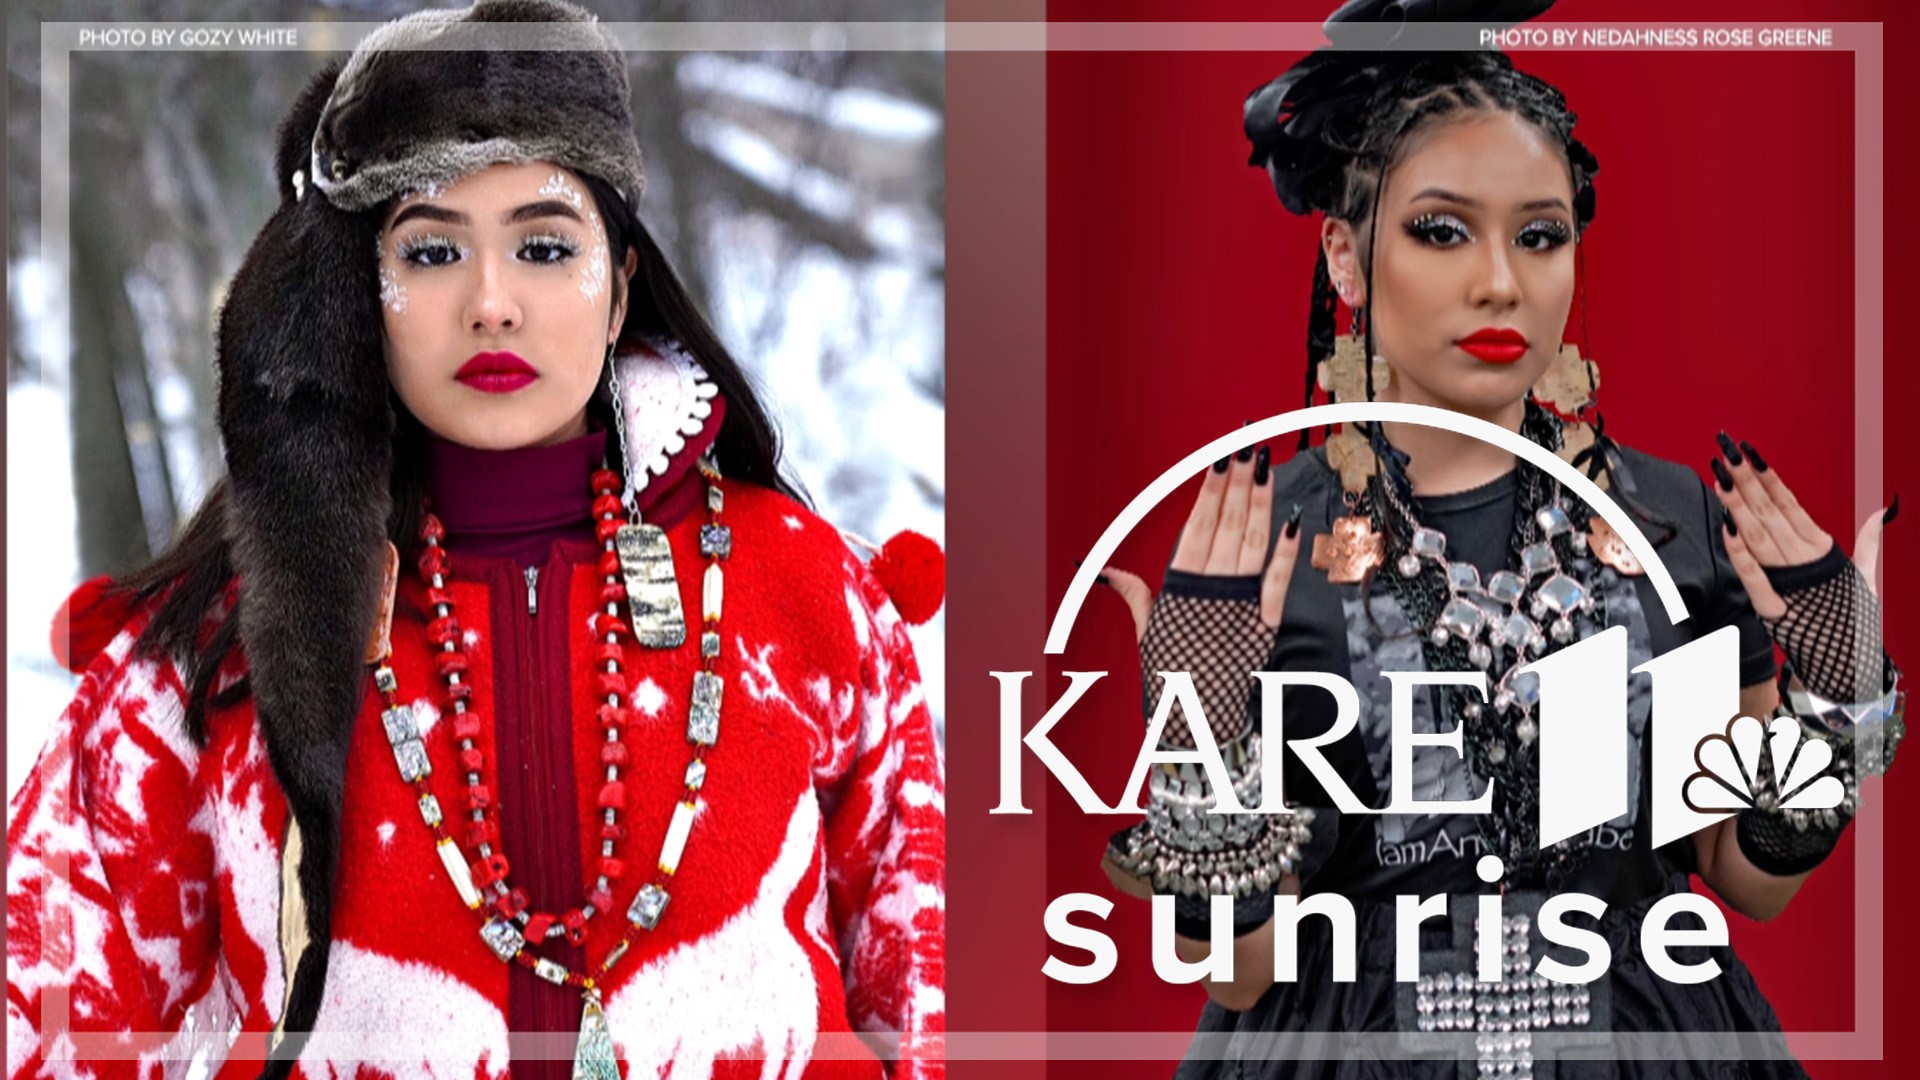 On Tuesday, Snowy White will walk in Northern Lights: A Native Nations Fashion Night & Fashion Week MN Couture Show, produced by her grandmother, Delina White.